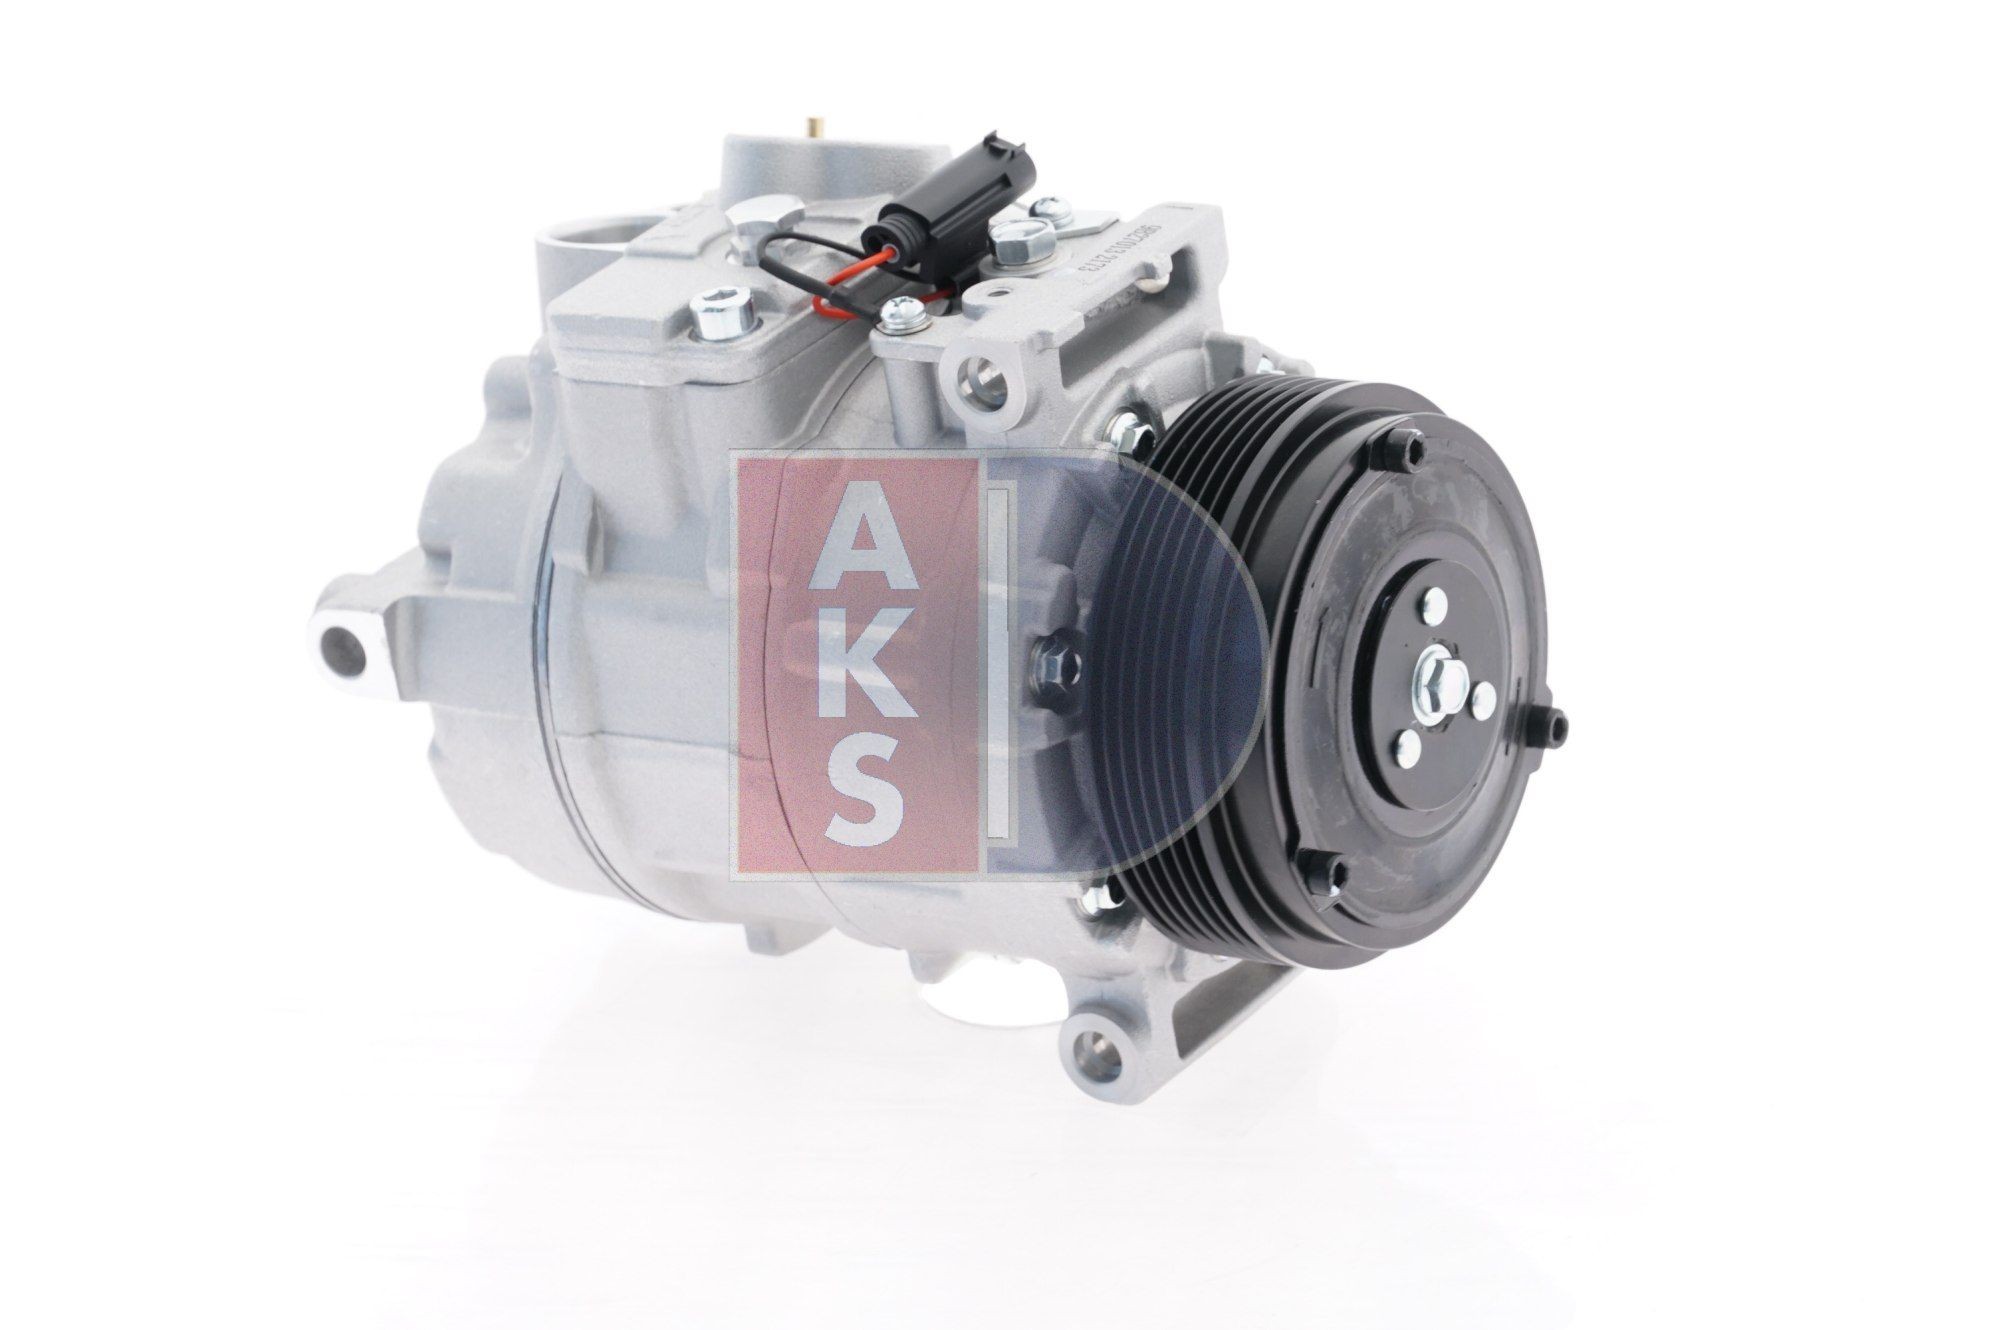 Air conditioning compressor 851079N from AKS DASIS